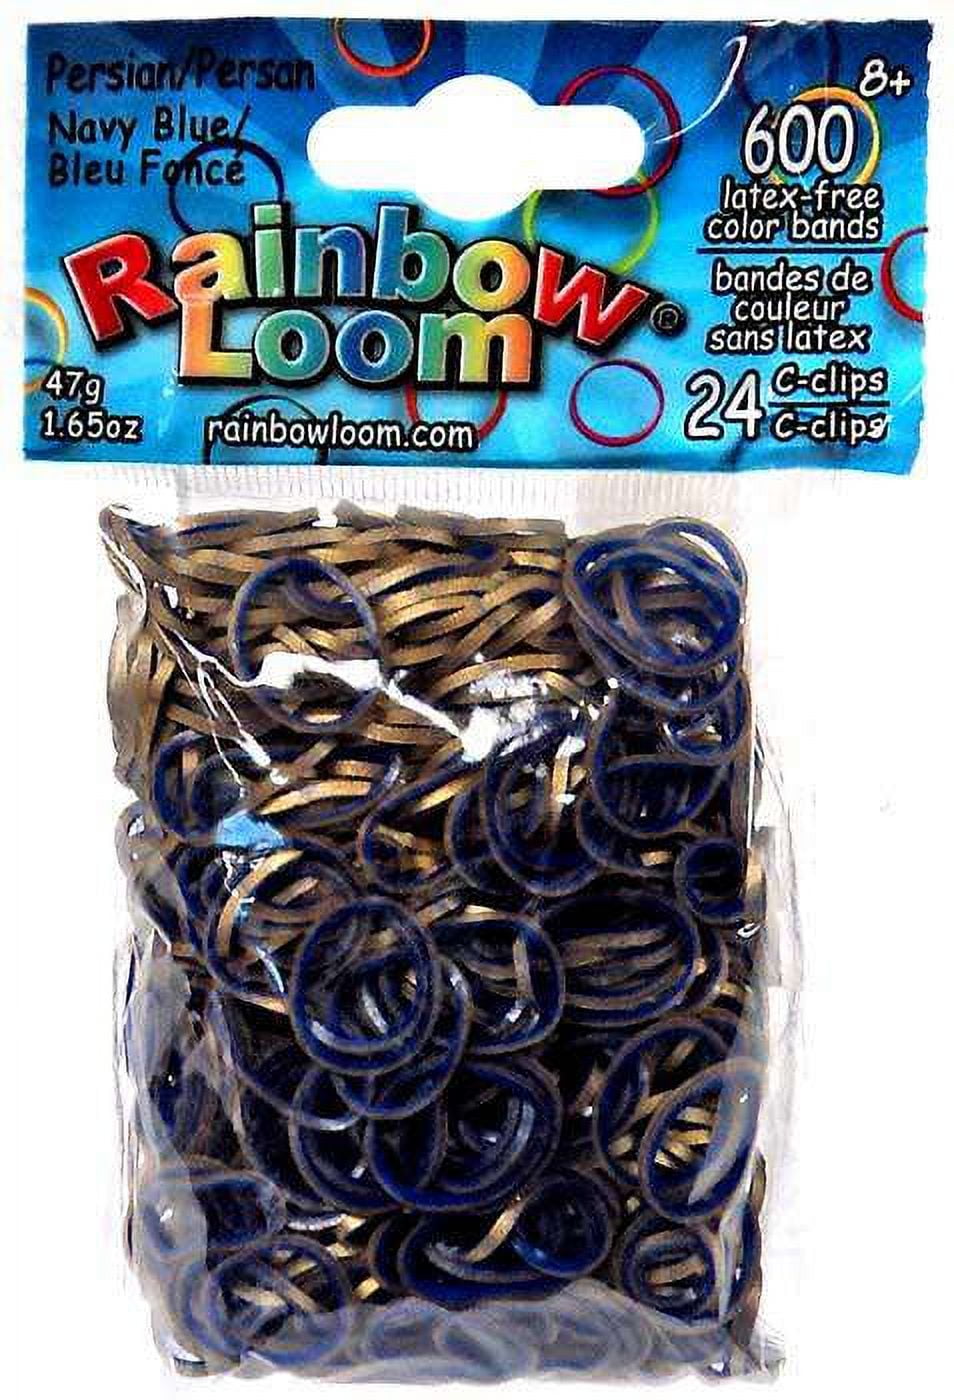 Rainbow Looms and a Band Brand Review »